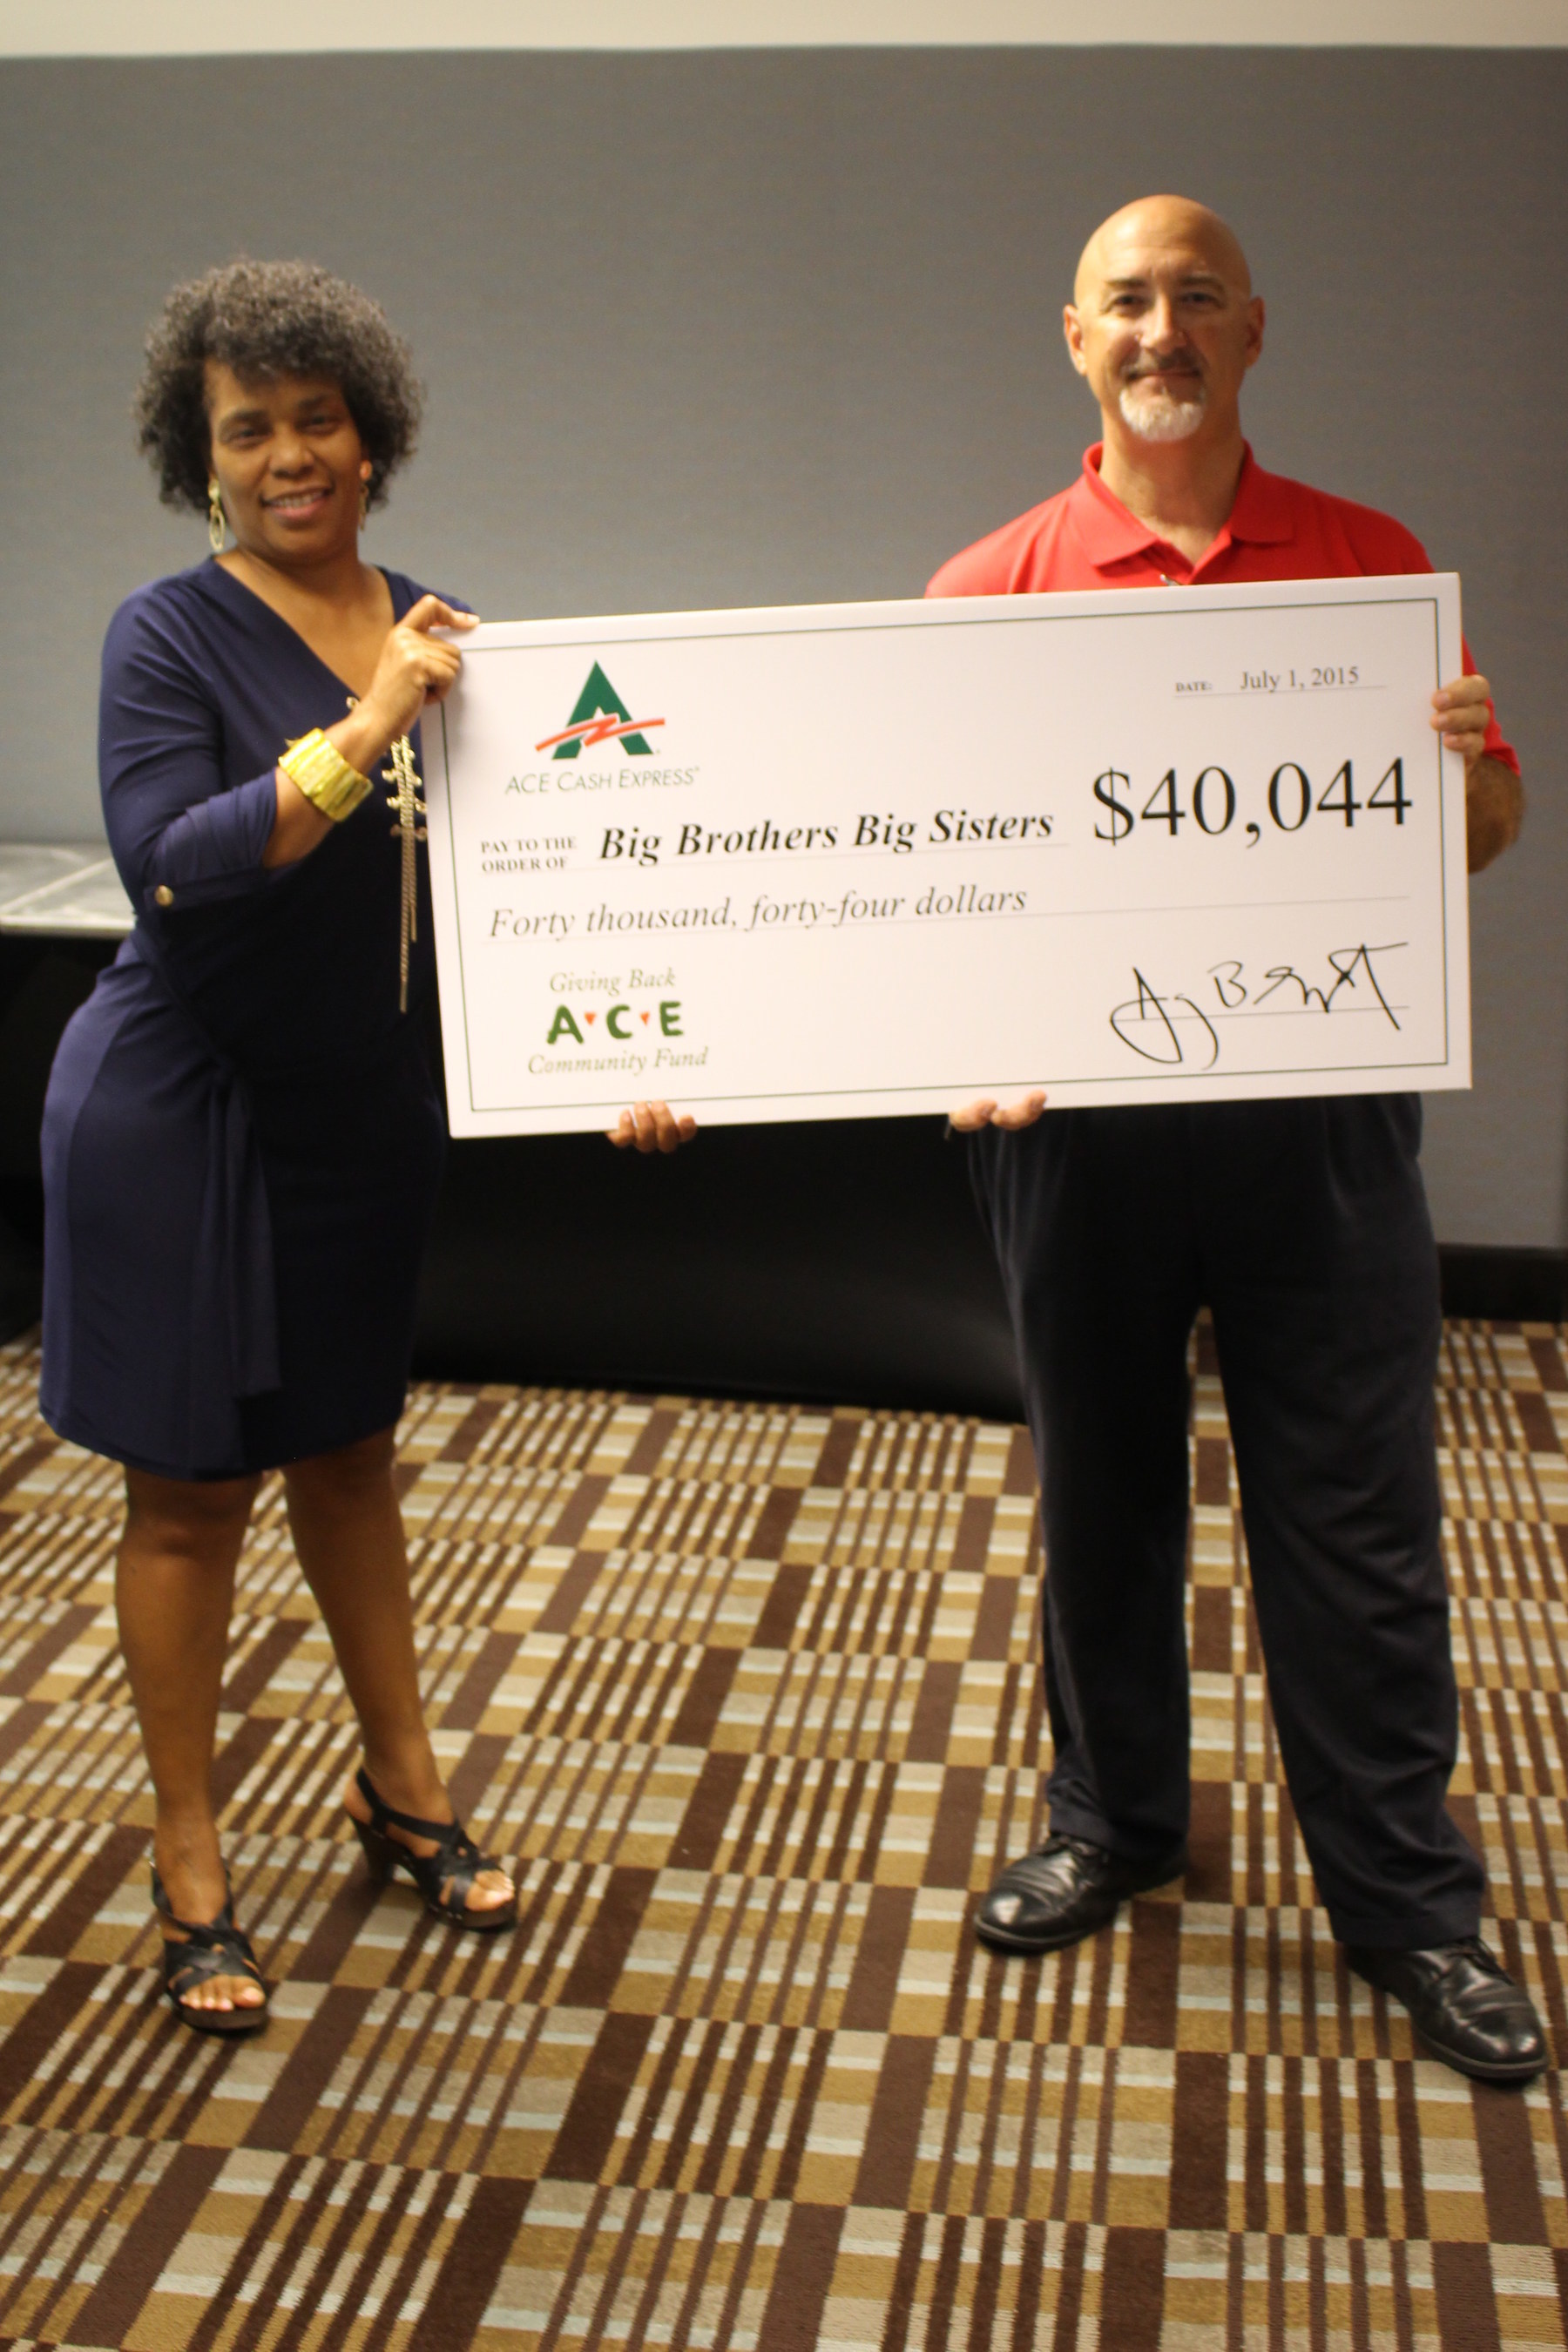 ACE Cash Express Supports Mission to Change the Lives of Children Facing Adversity